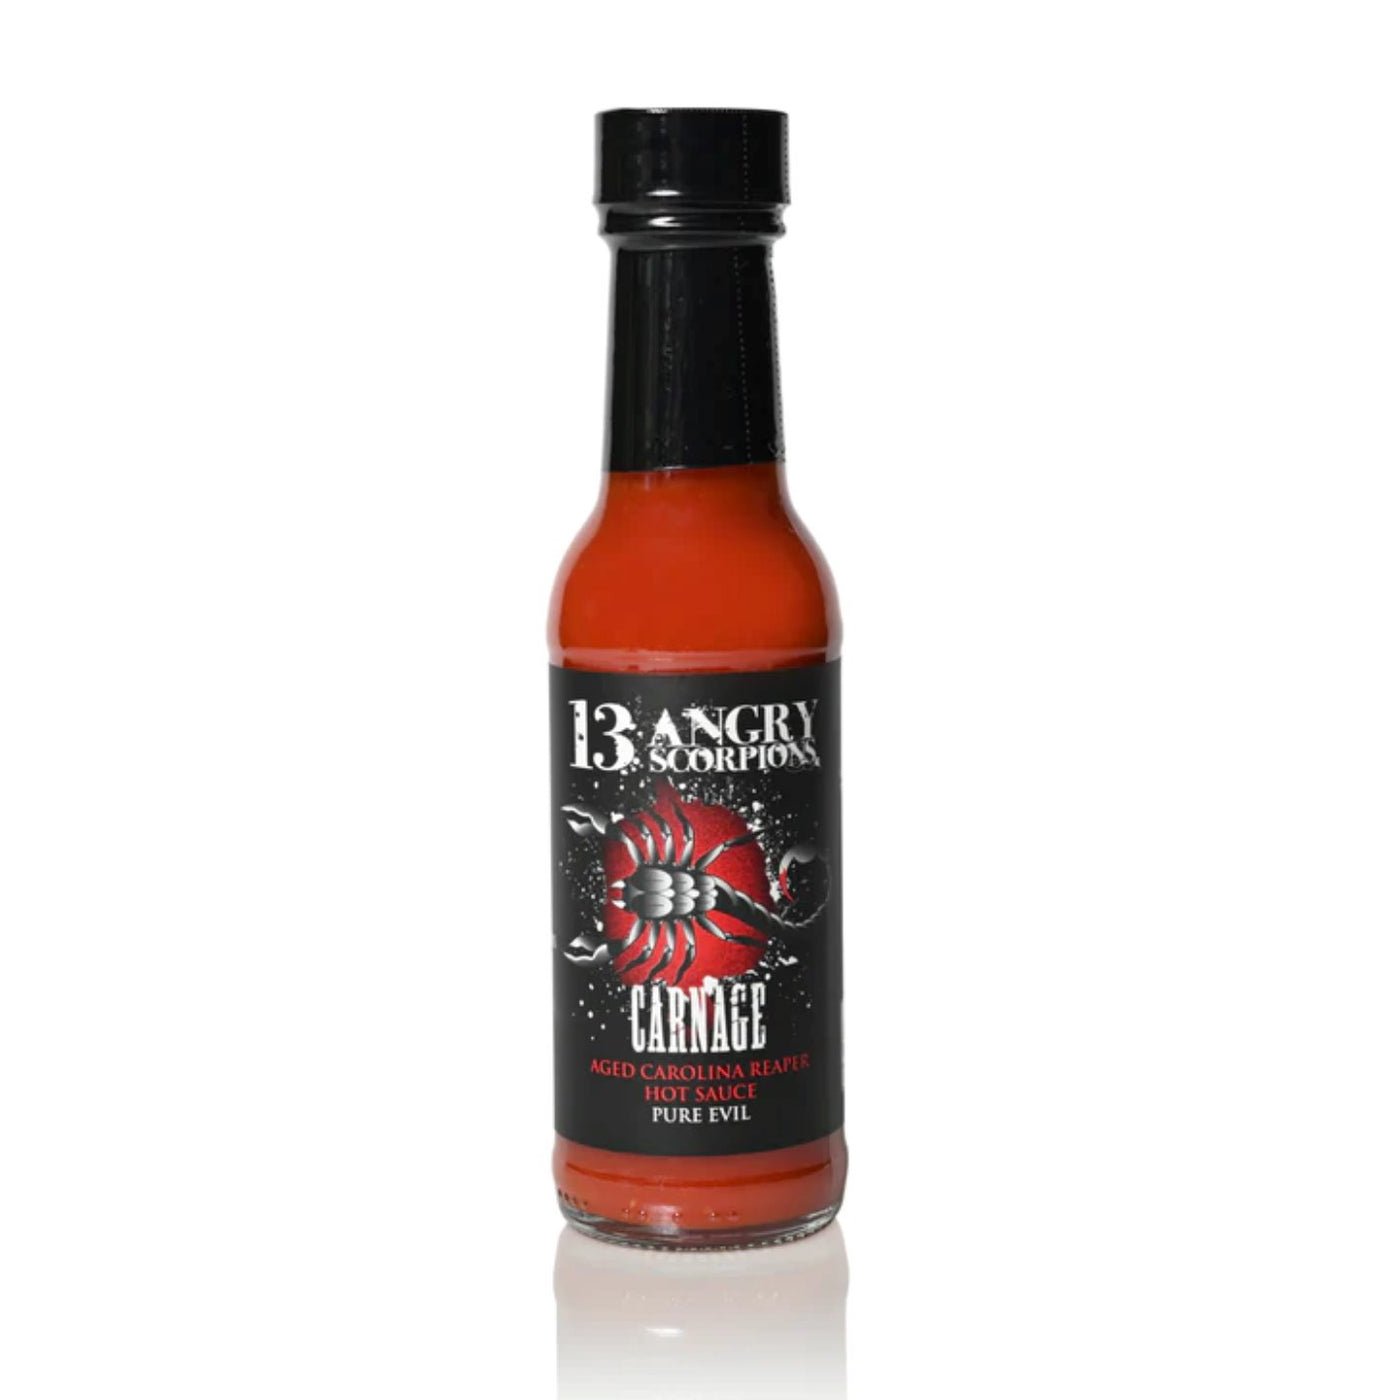 13 Angry Scorpions Carnage Hot Sauce 150ml